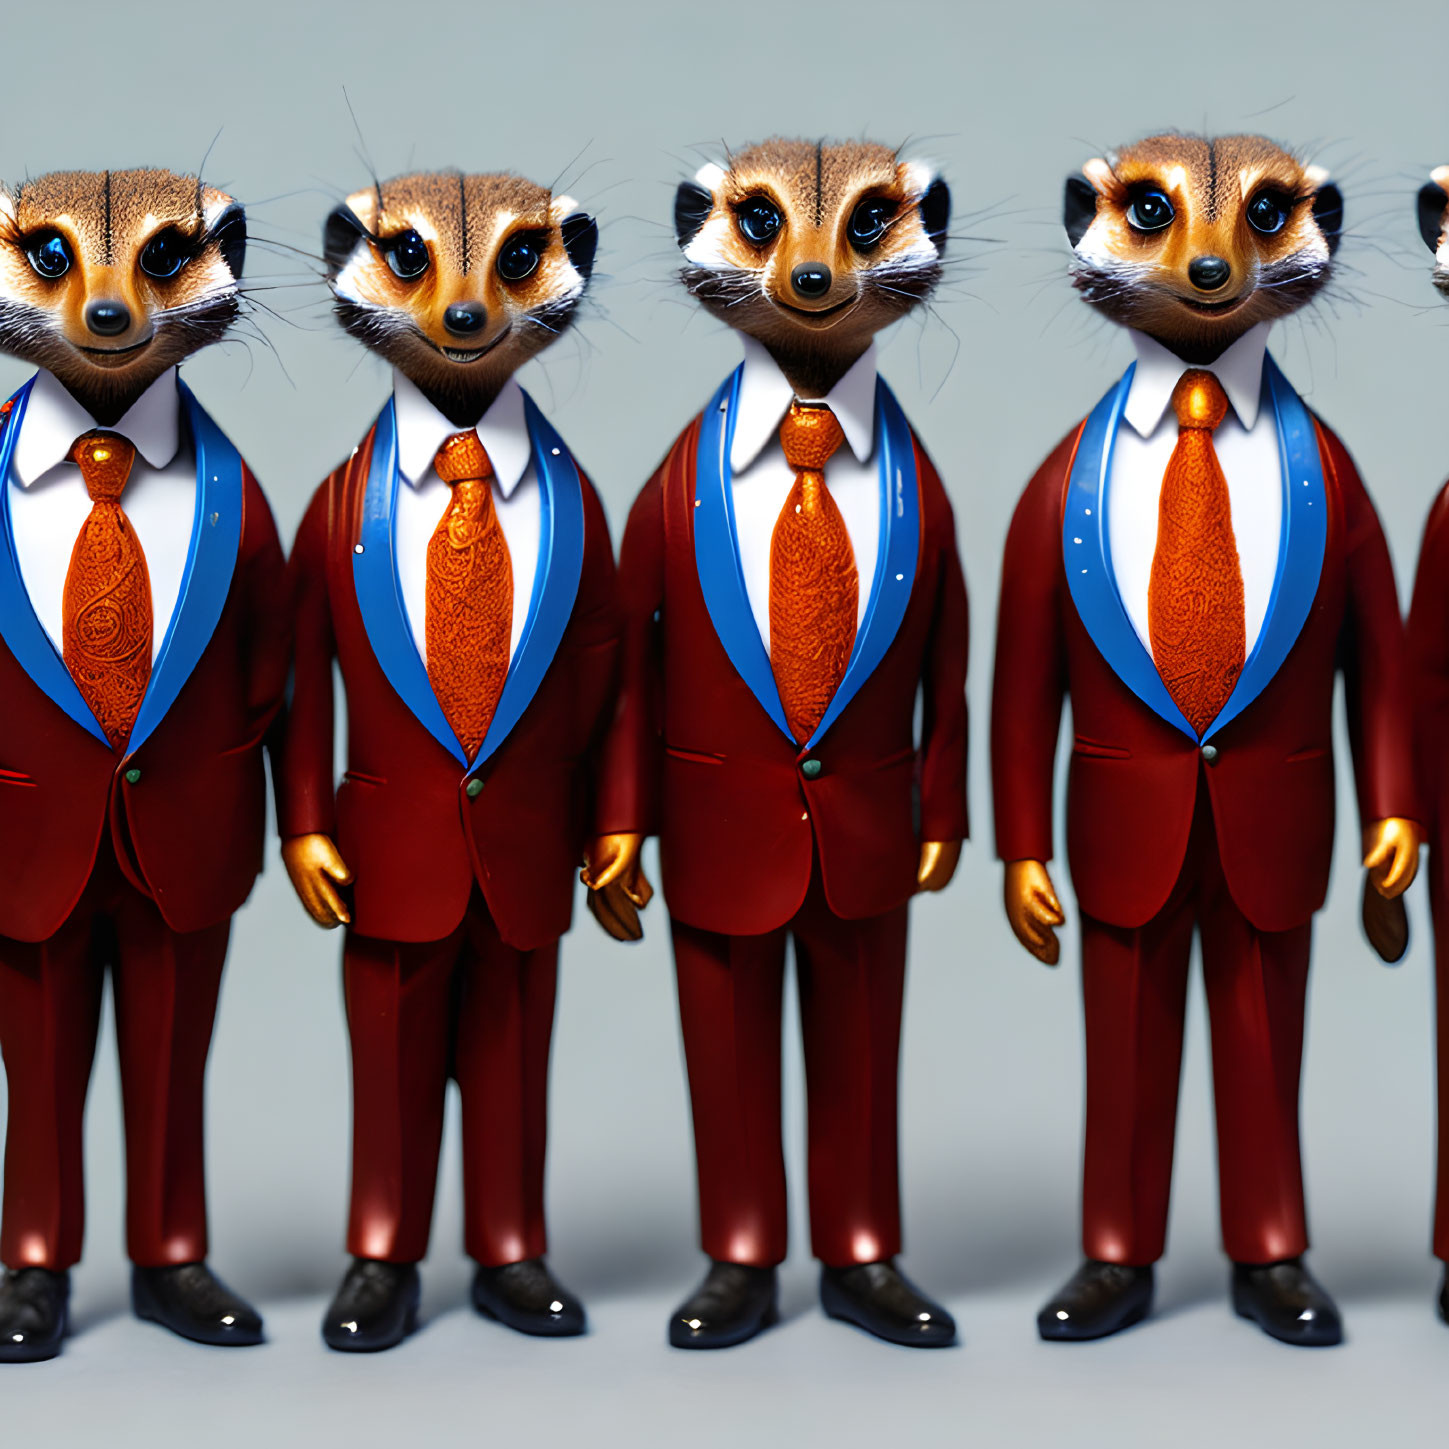 Five identical meerkat figures in red suits and ties on gray background